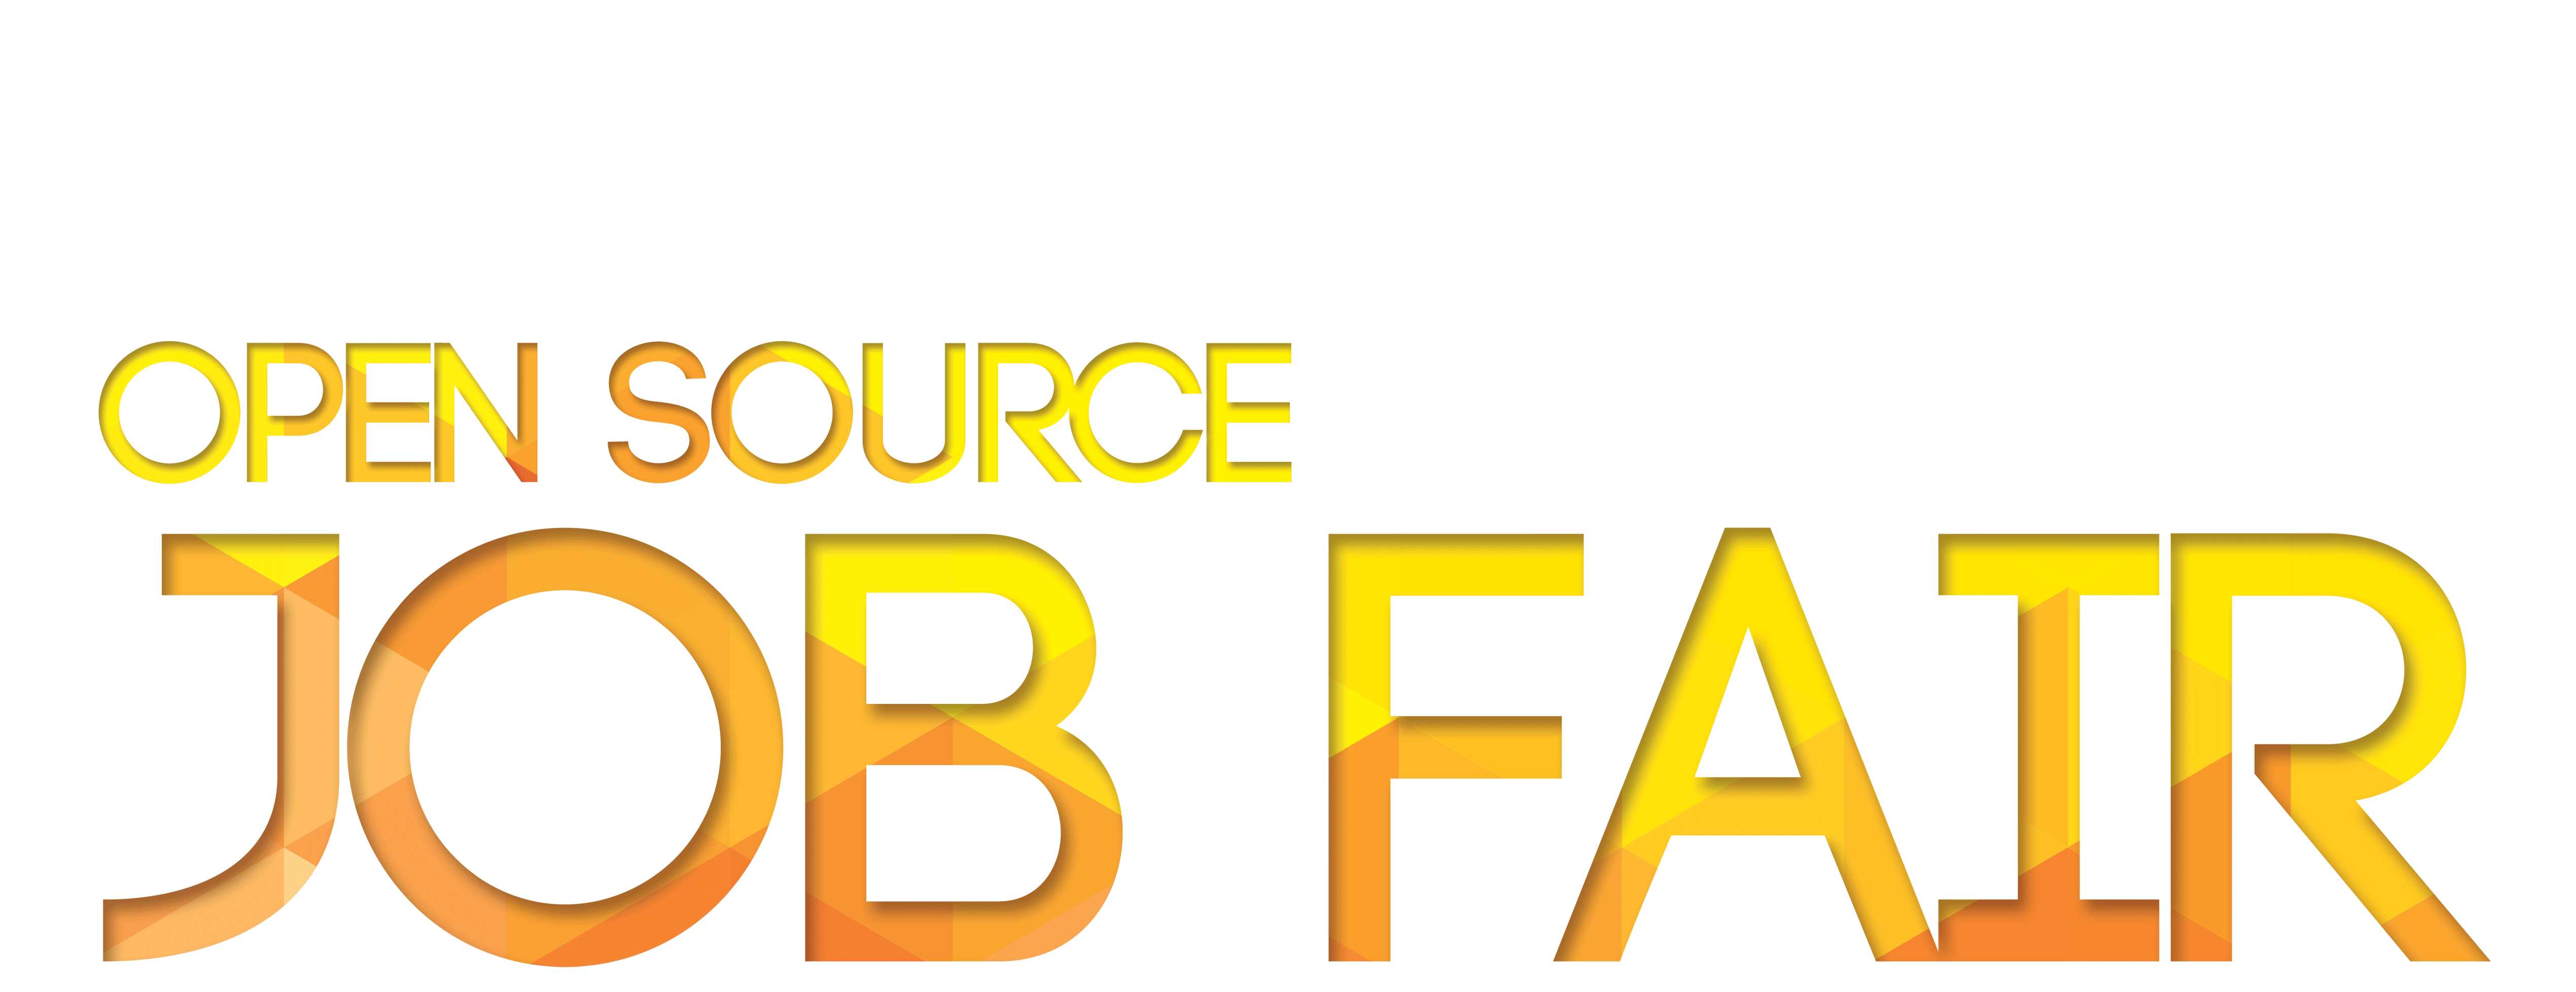 ULYSSIS presents the ULYSSIS Open Source Job Fair - Unique FOSS Job Opportunities - 22 March 2016